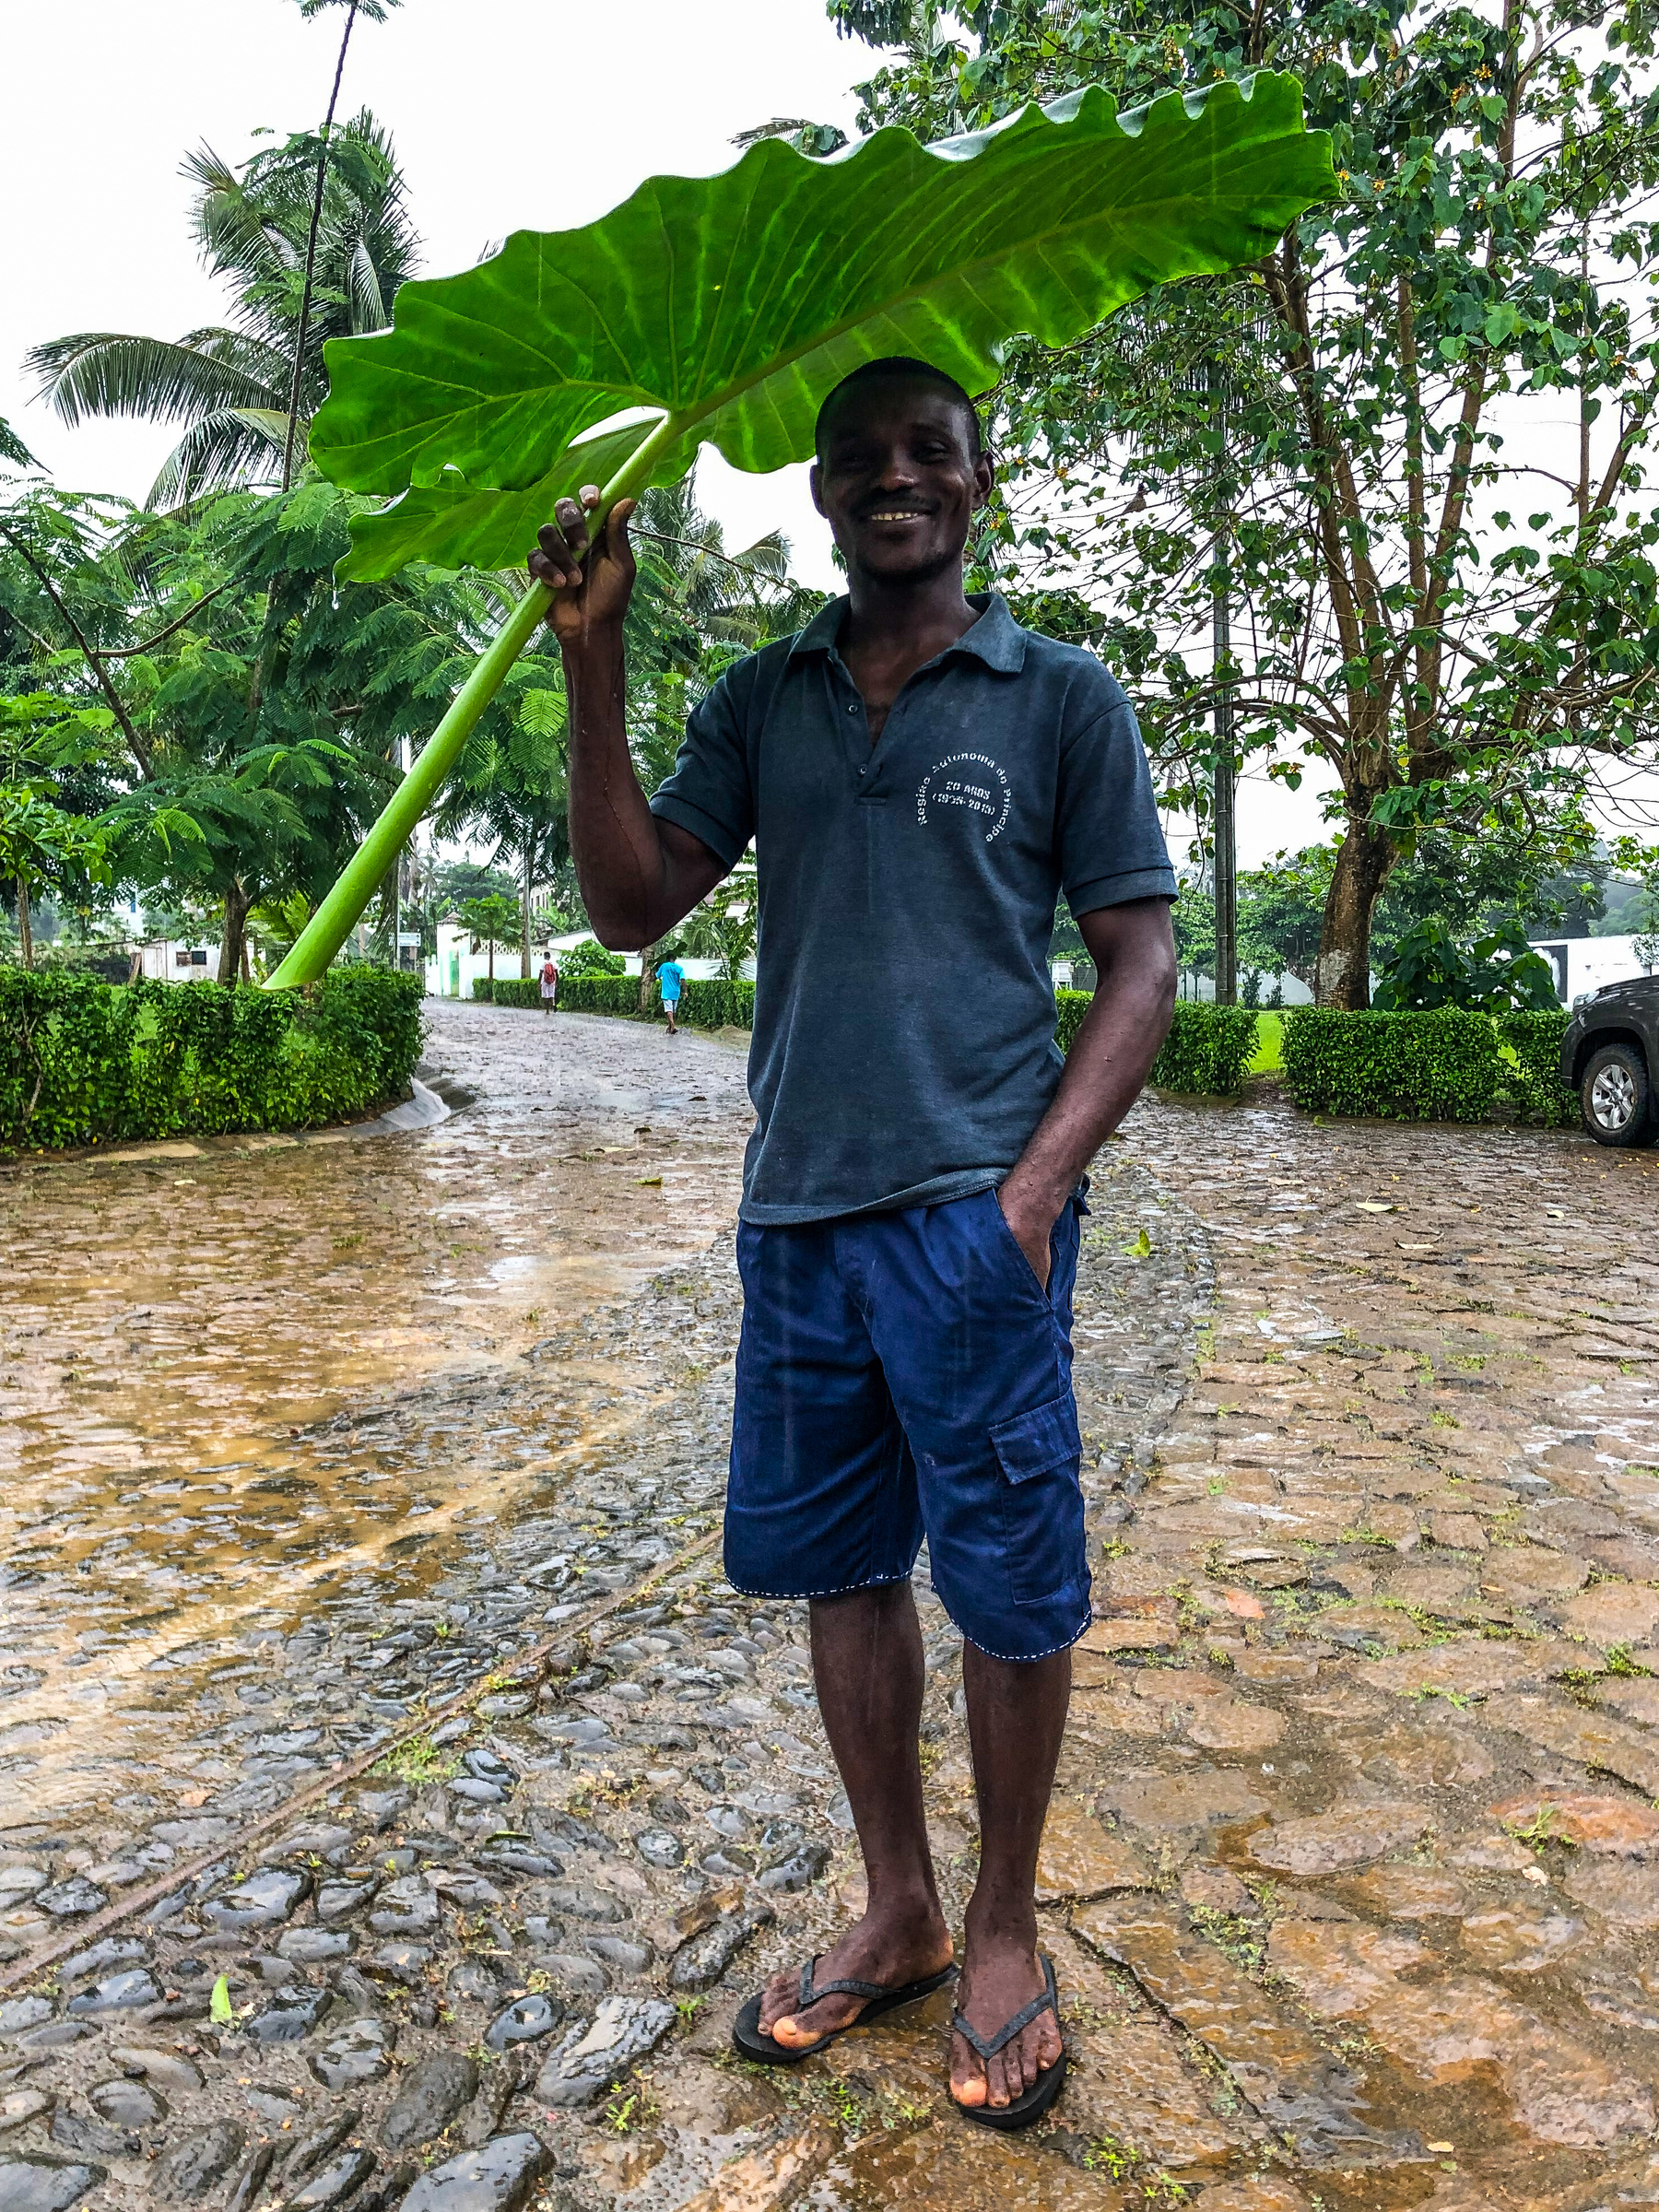 A man stands on a cobblestone path smiling, holding a large green leaf over his head like an umbrella. It appears to be raining, and there are trees and a vehicle in the background.